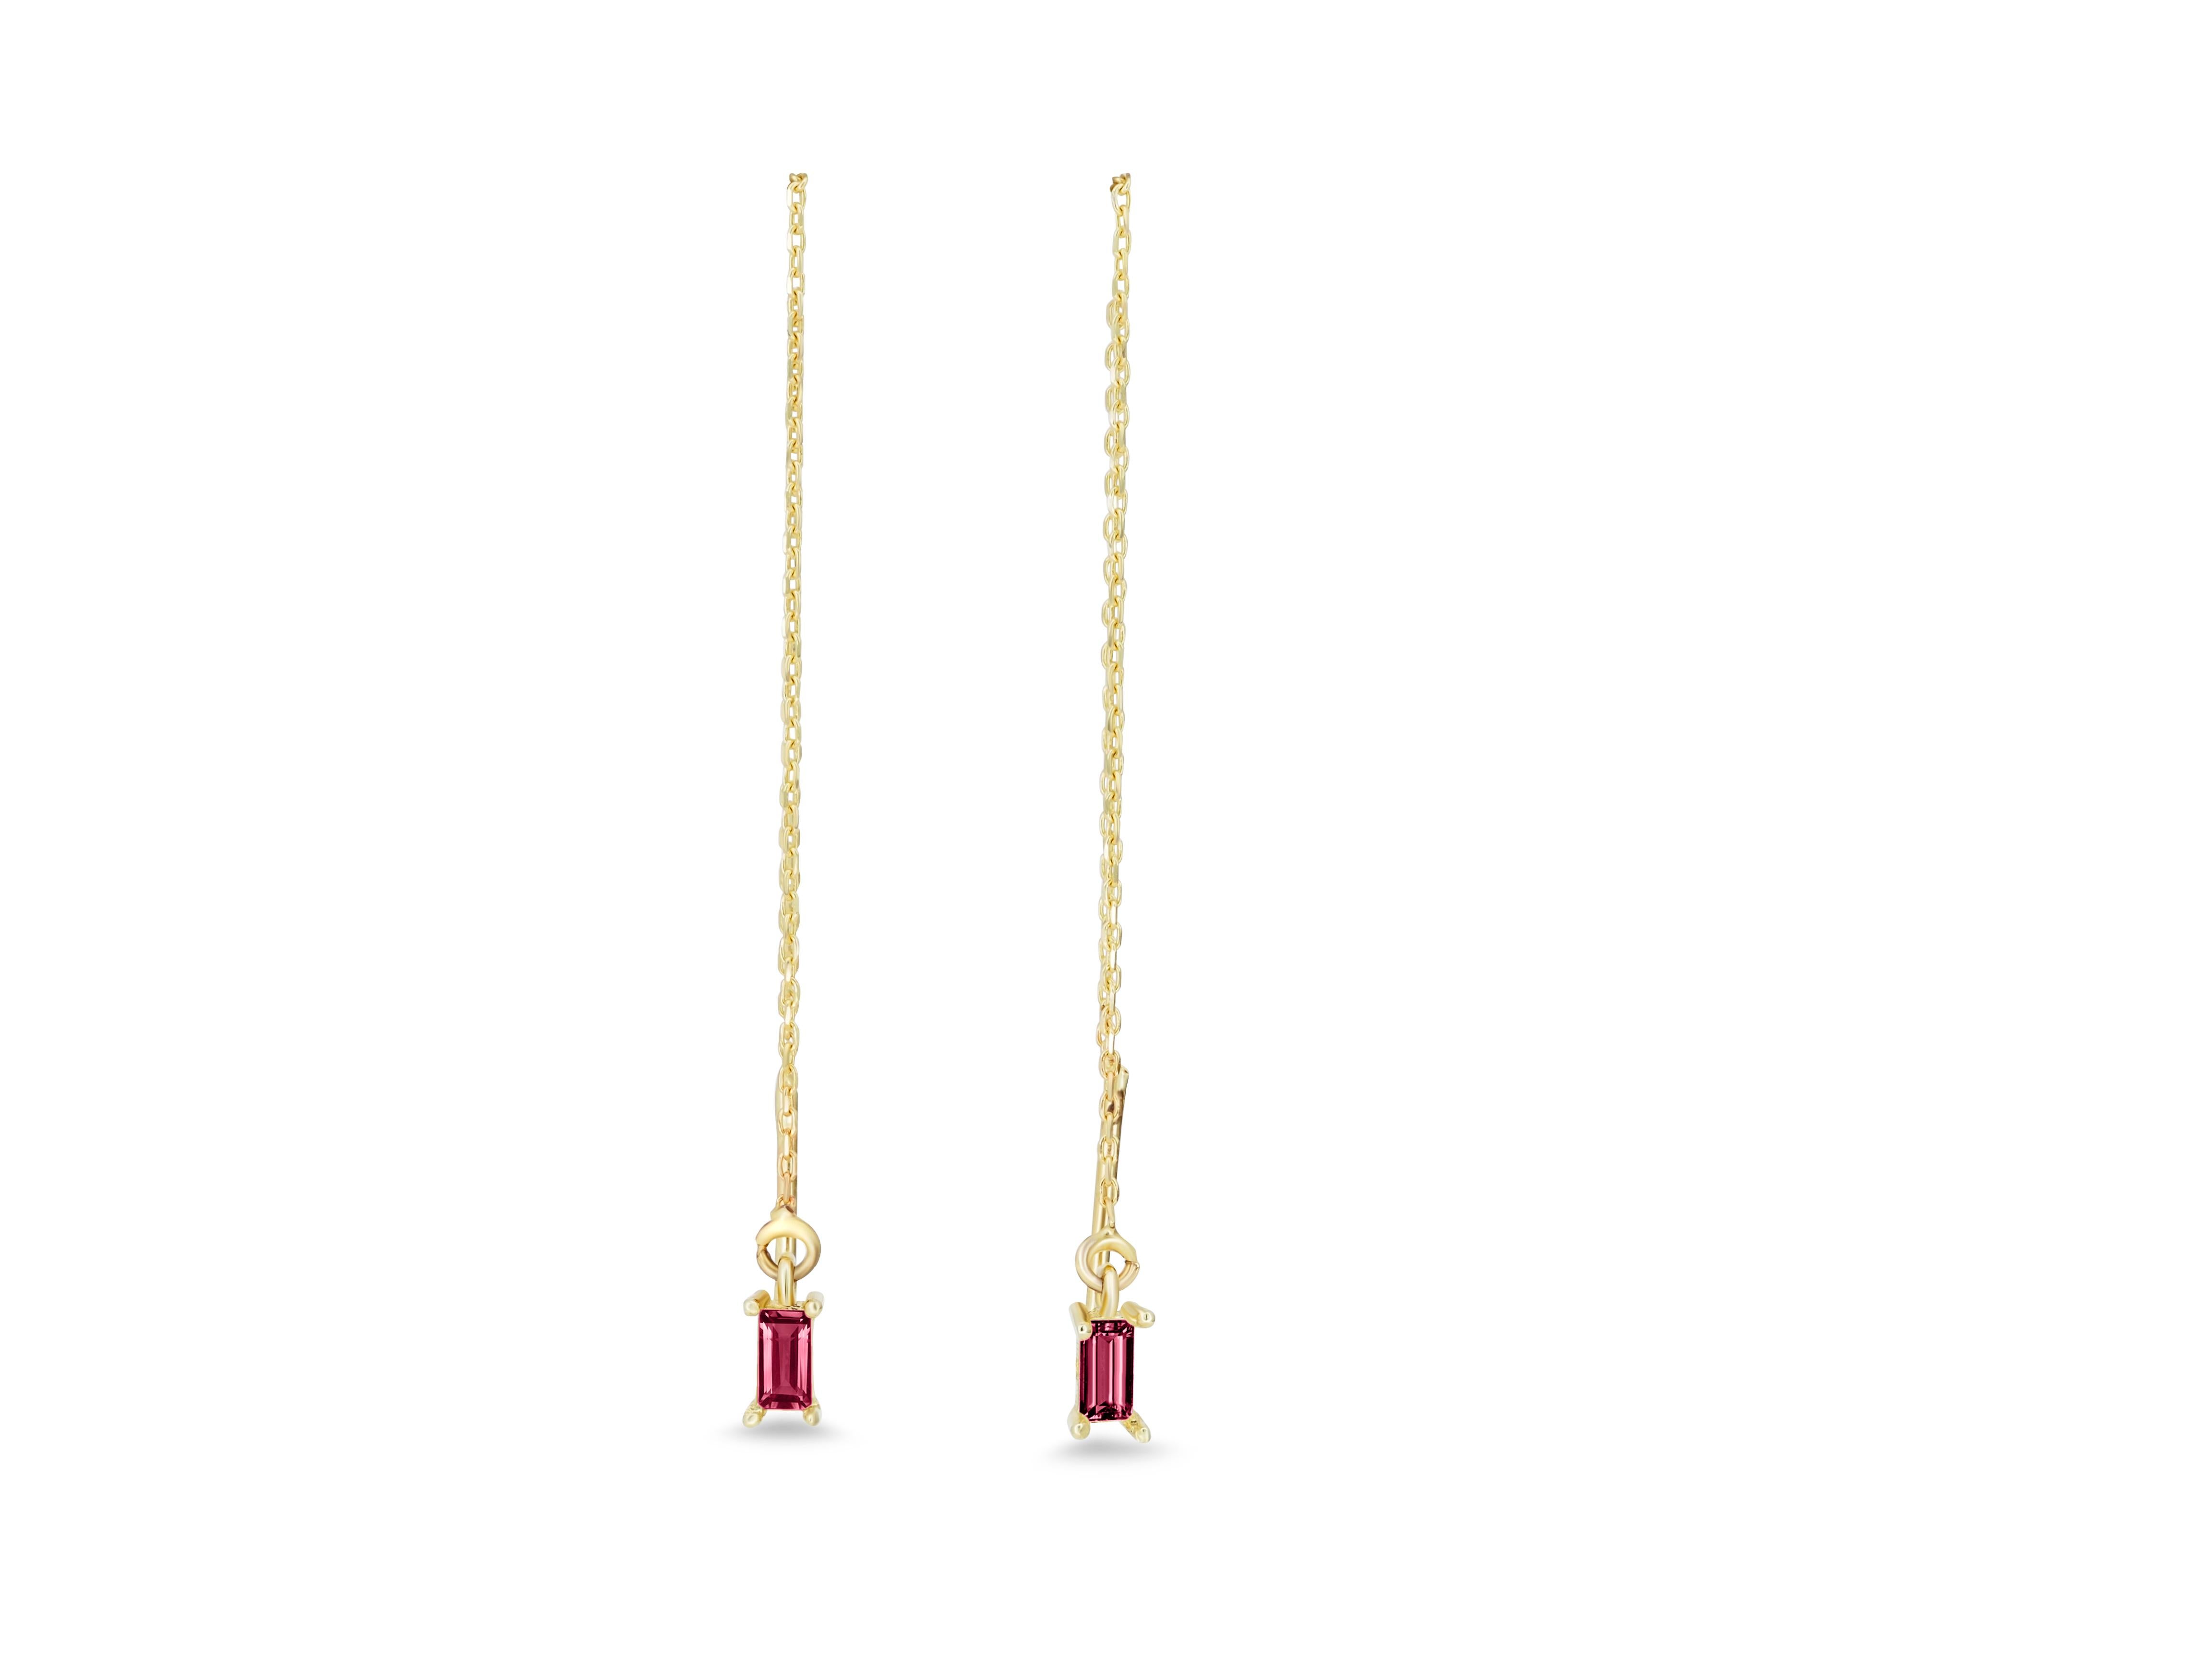 Baguette Cut Chain 14k Gold Earrings with natural rubies ! For Sale